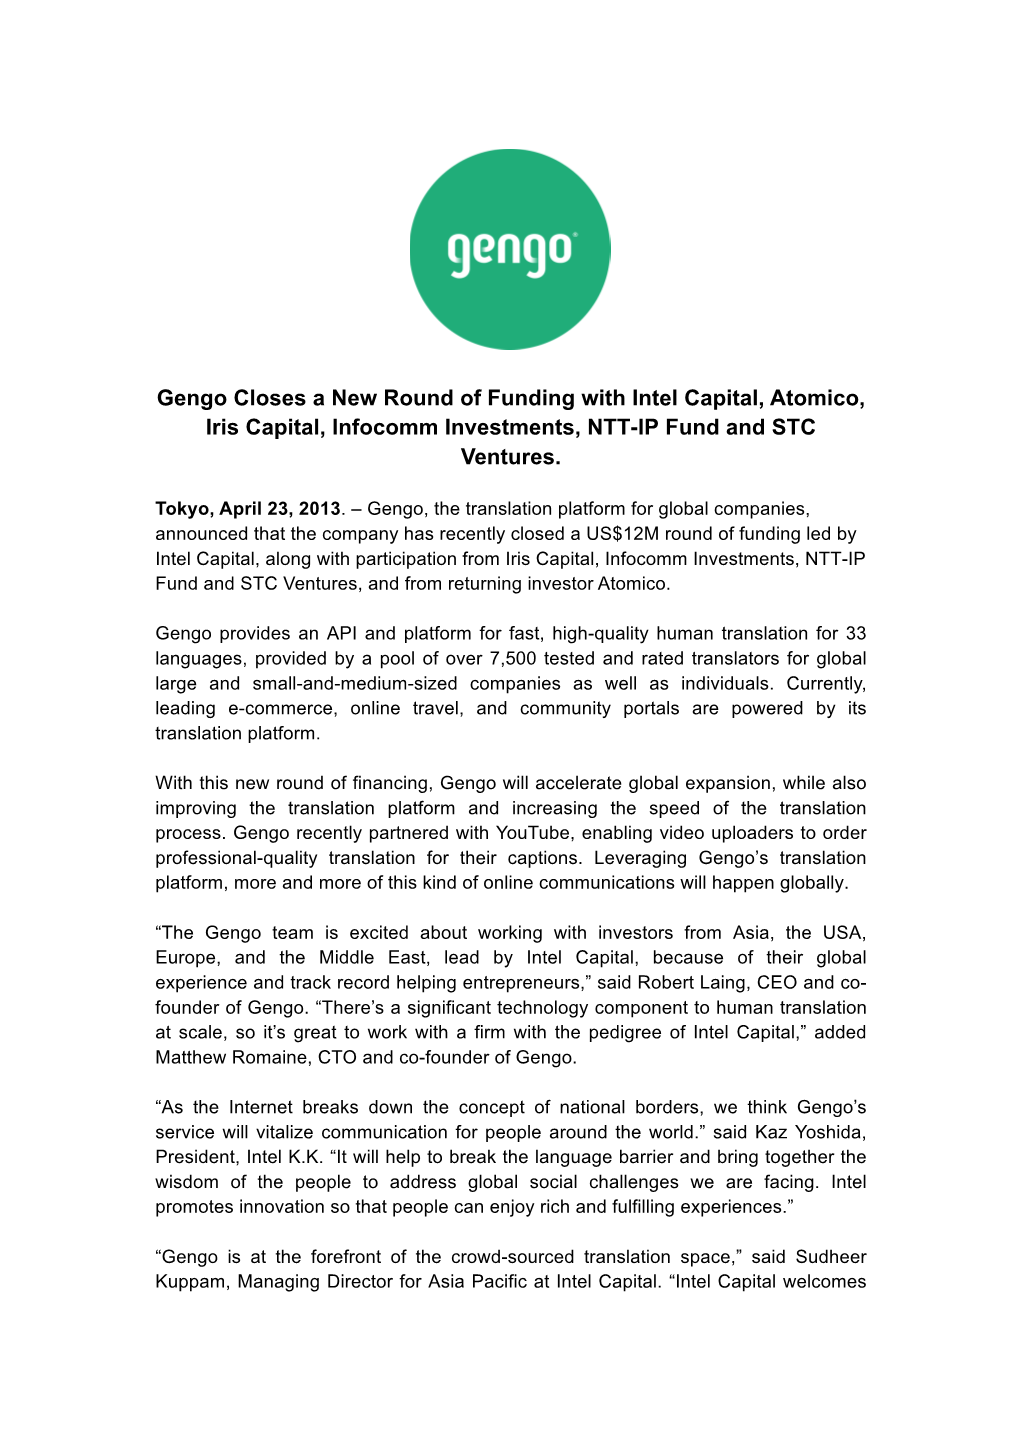 Gengo Closes a New Round of Funding with Intel Capital, Atomico, Iris Capital, Infocomm Investments, NTT-IP Fund and STC Ventures